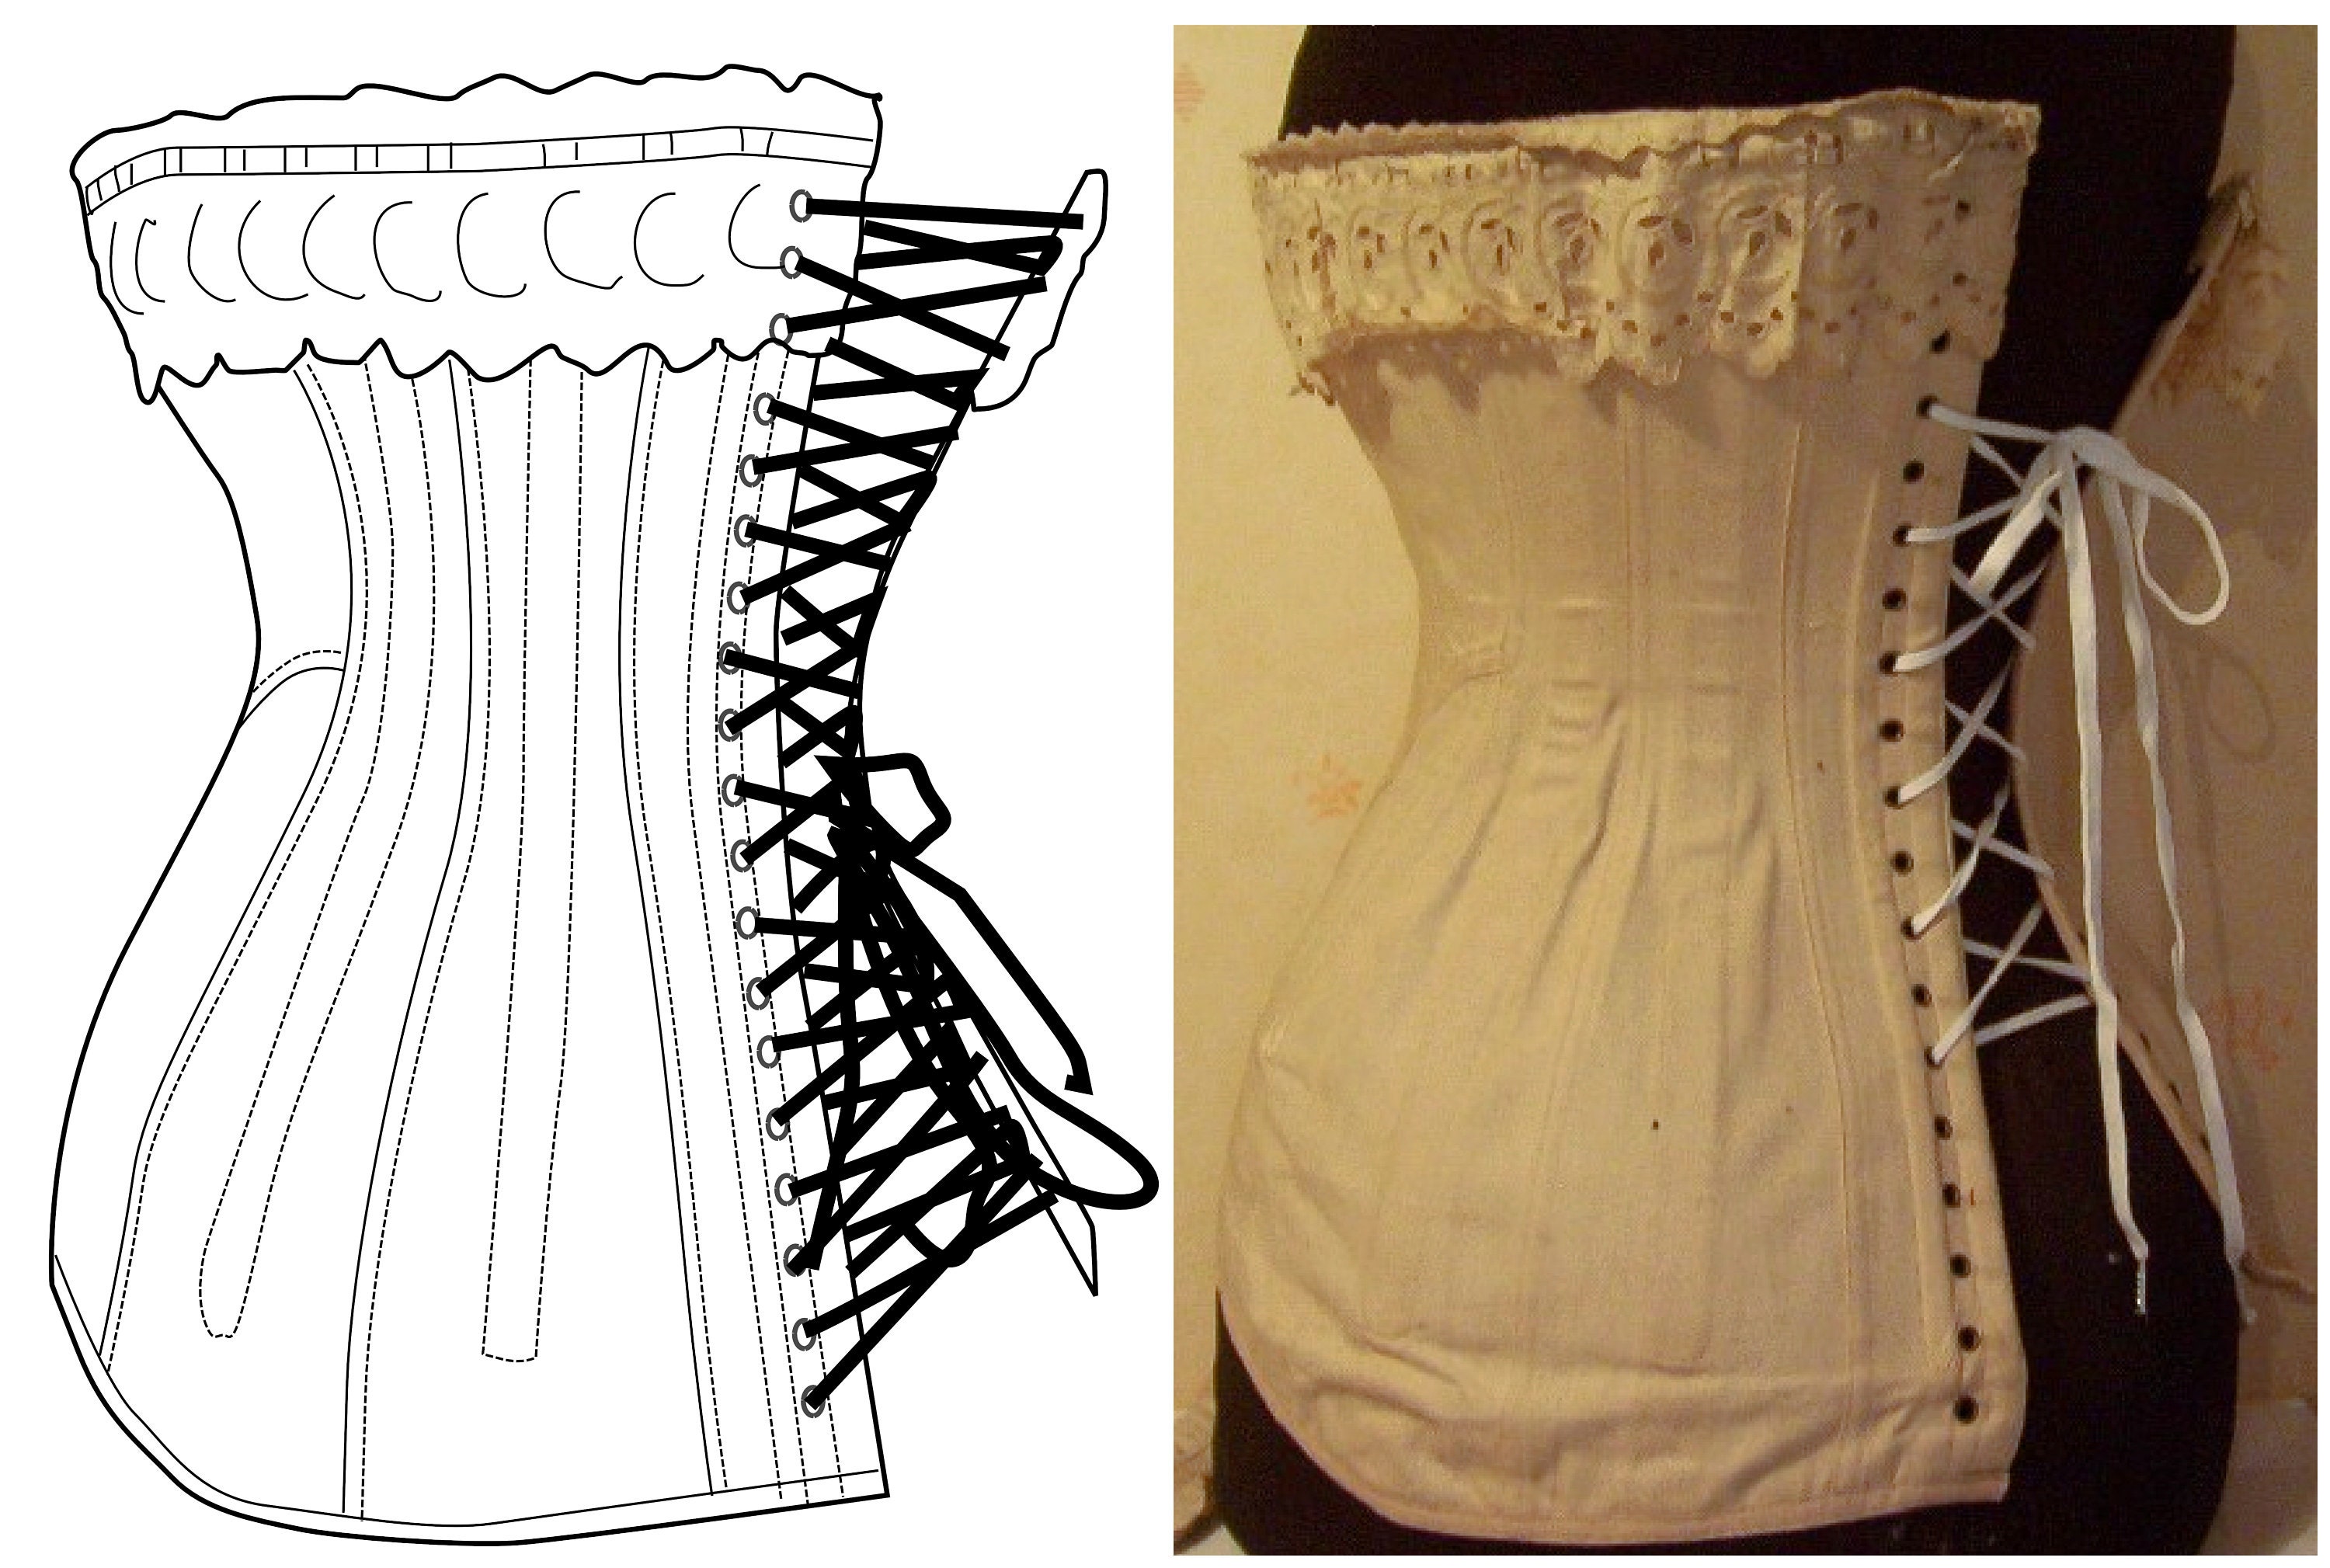 SIZE US Rtw 12-14 Pretty Housemaid Late Victorian Corset Pattern. Printable  Pdf -  Sweden